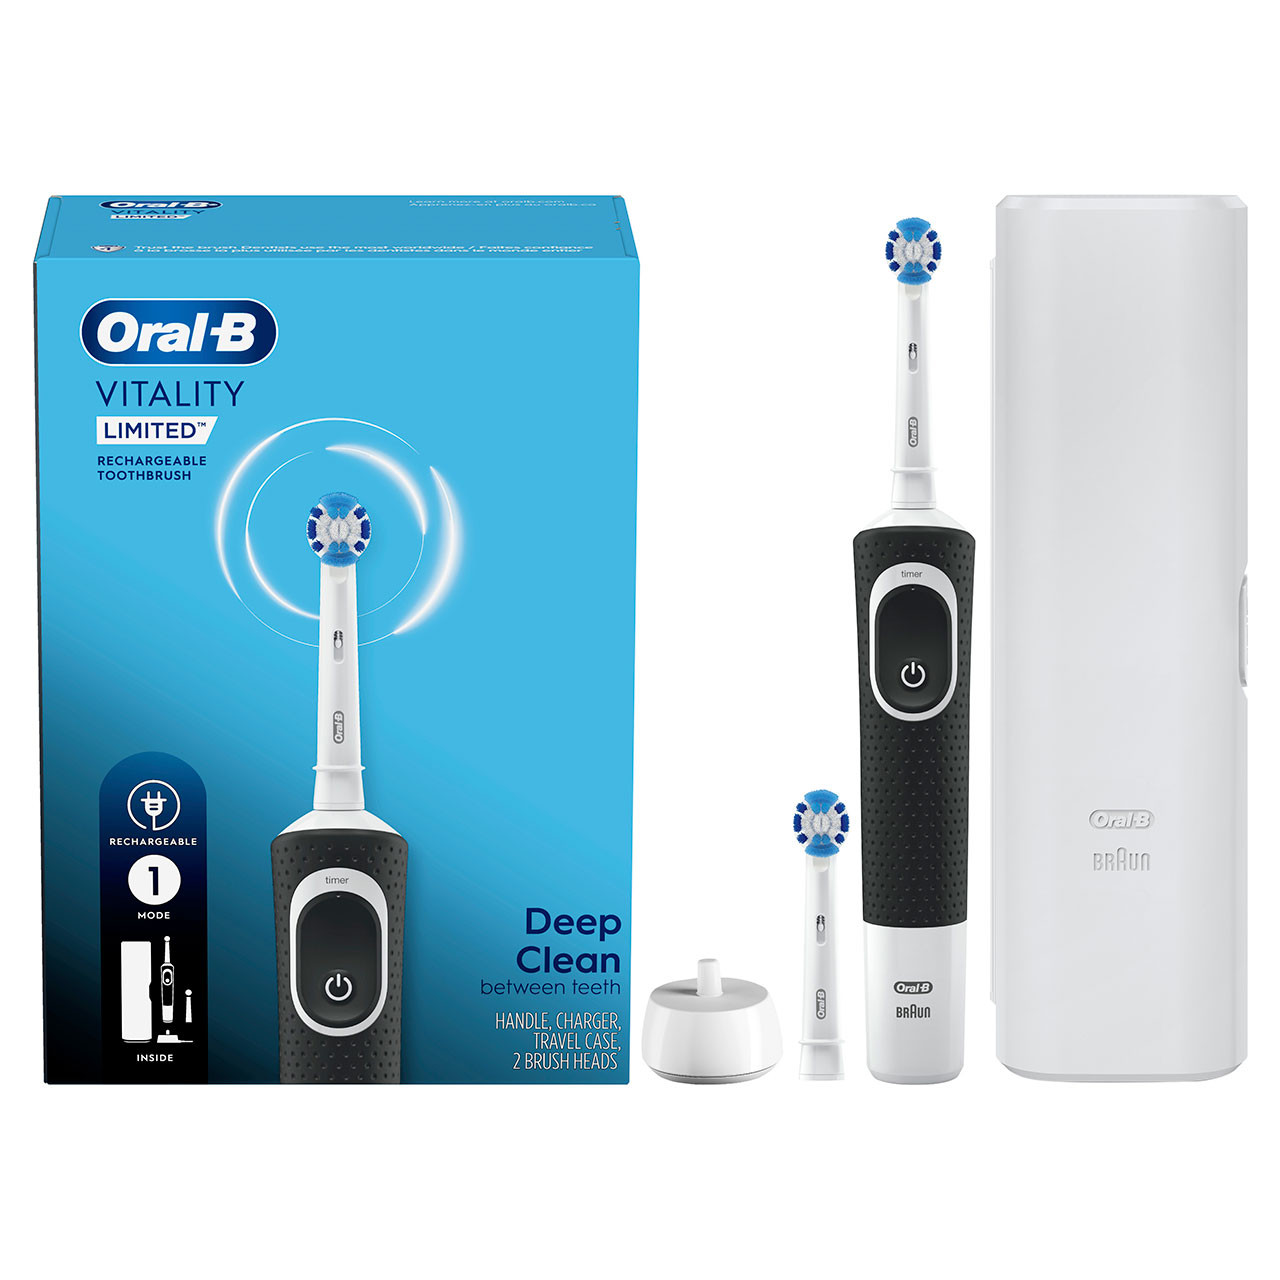 Oral-B Vitality Electric Toothbrush